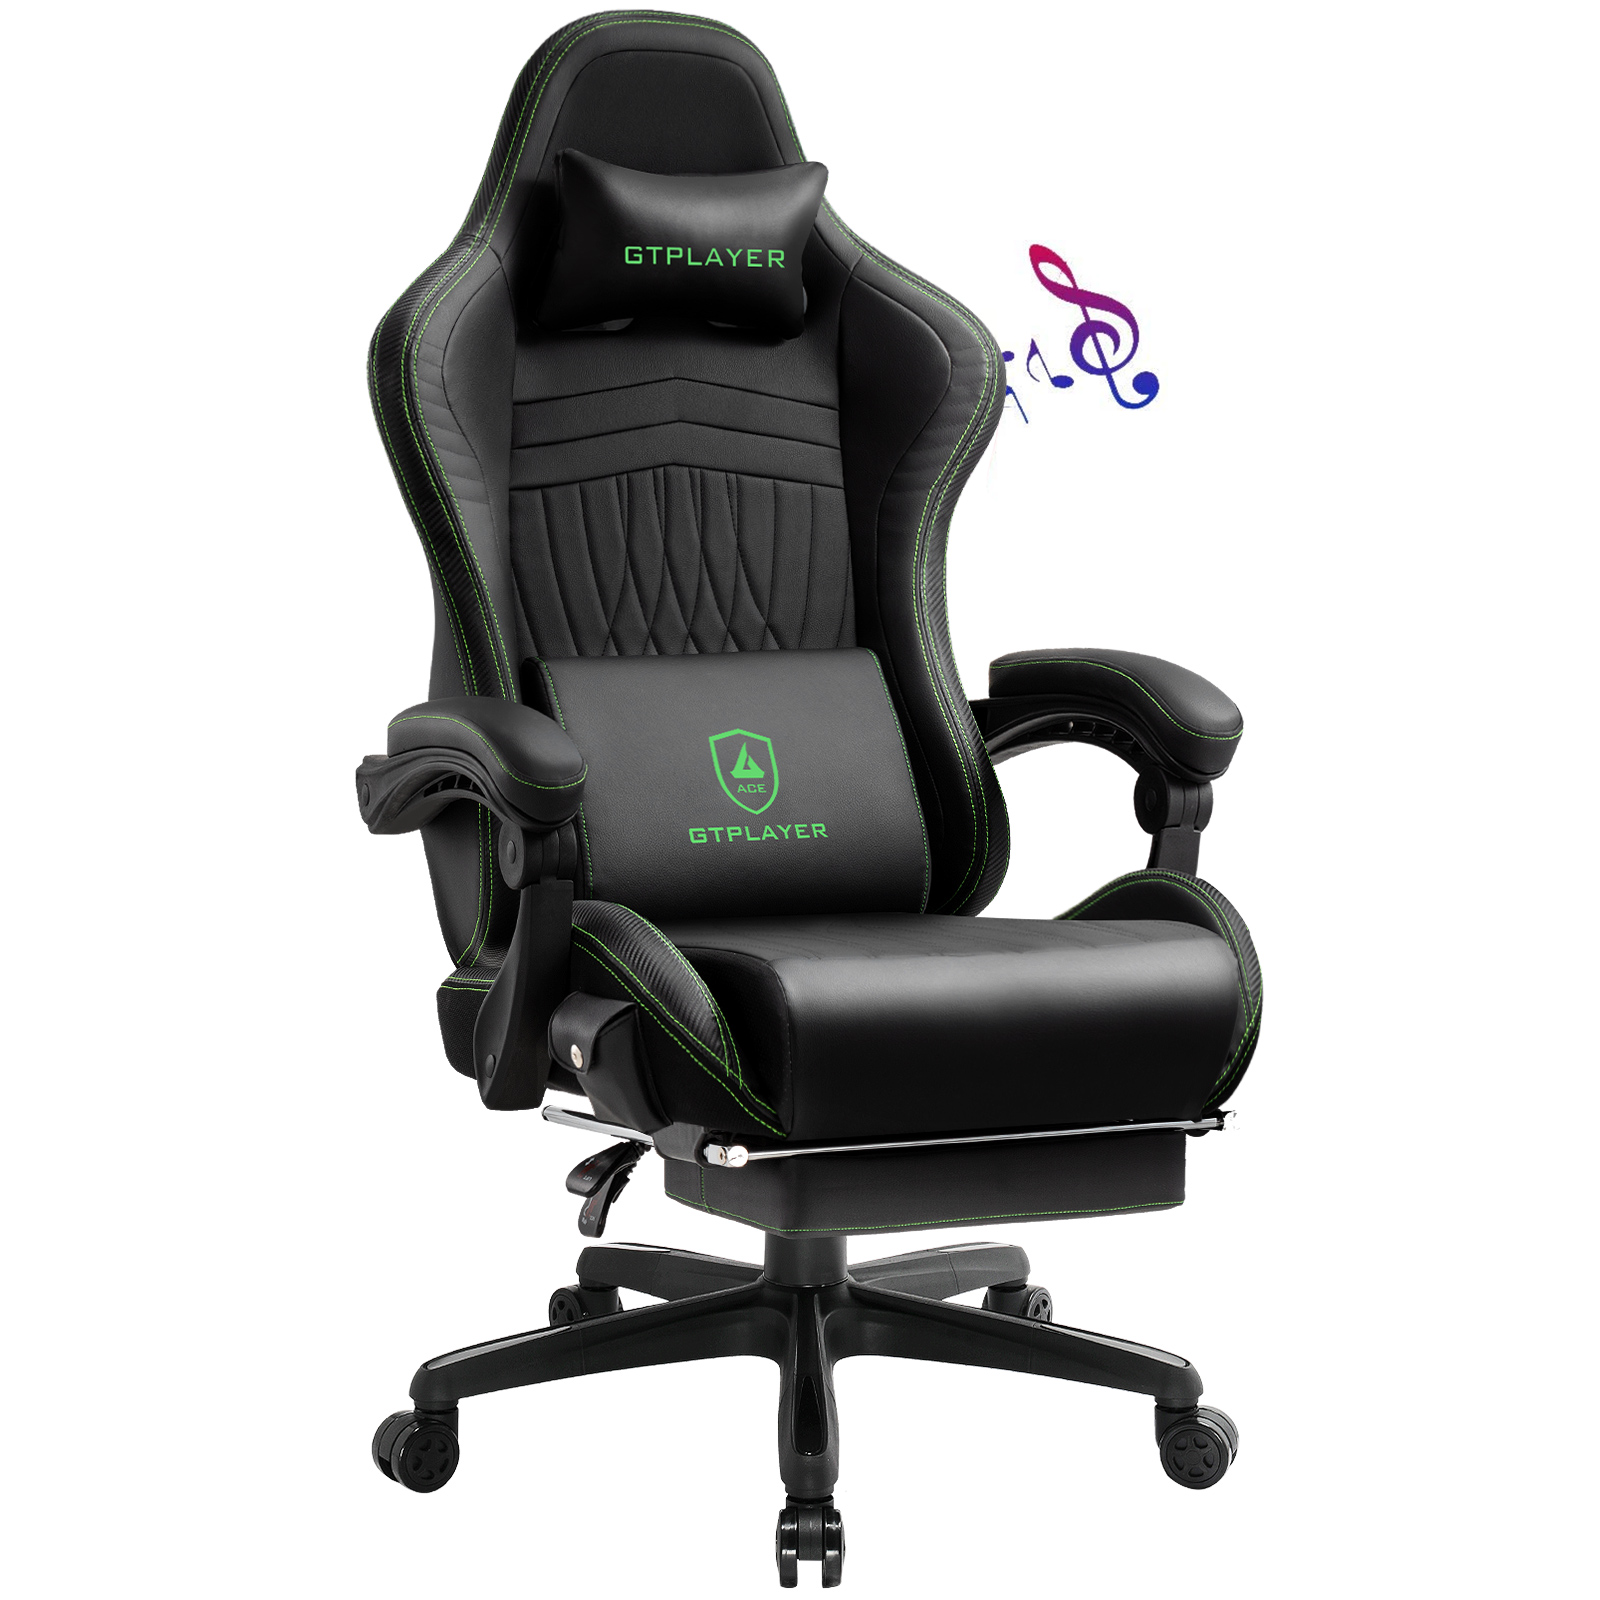 Gtplayer Pro Gaming Chair with Footrest, Dual Bluetooth 5.1 Speakers PVC Leather Recliner, Green - image 1 of 9